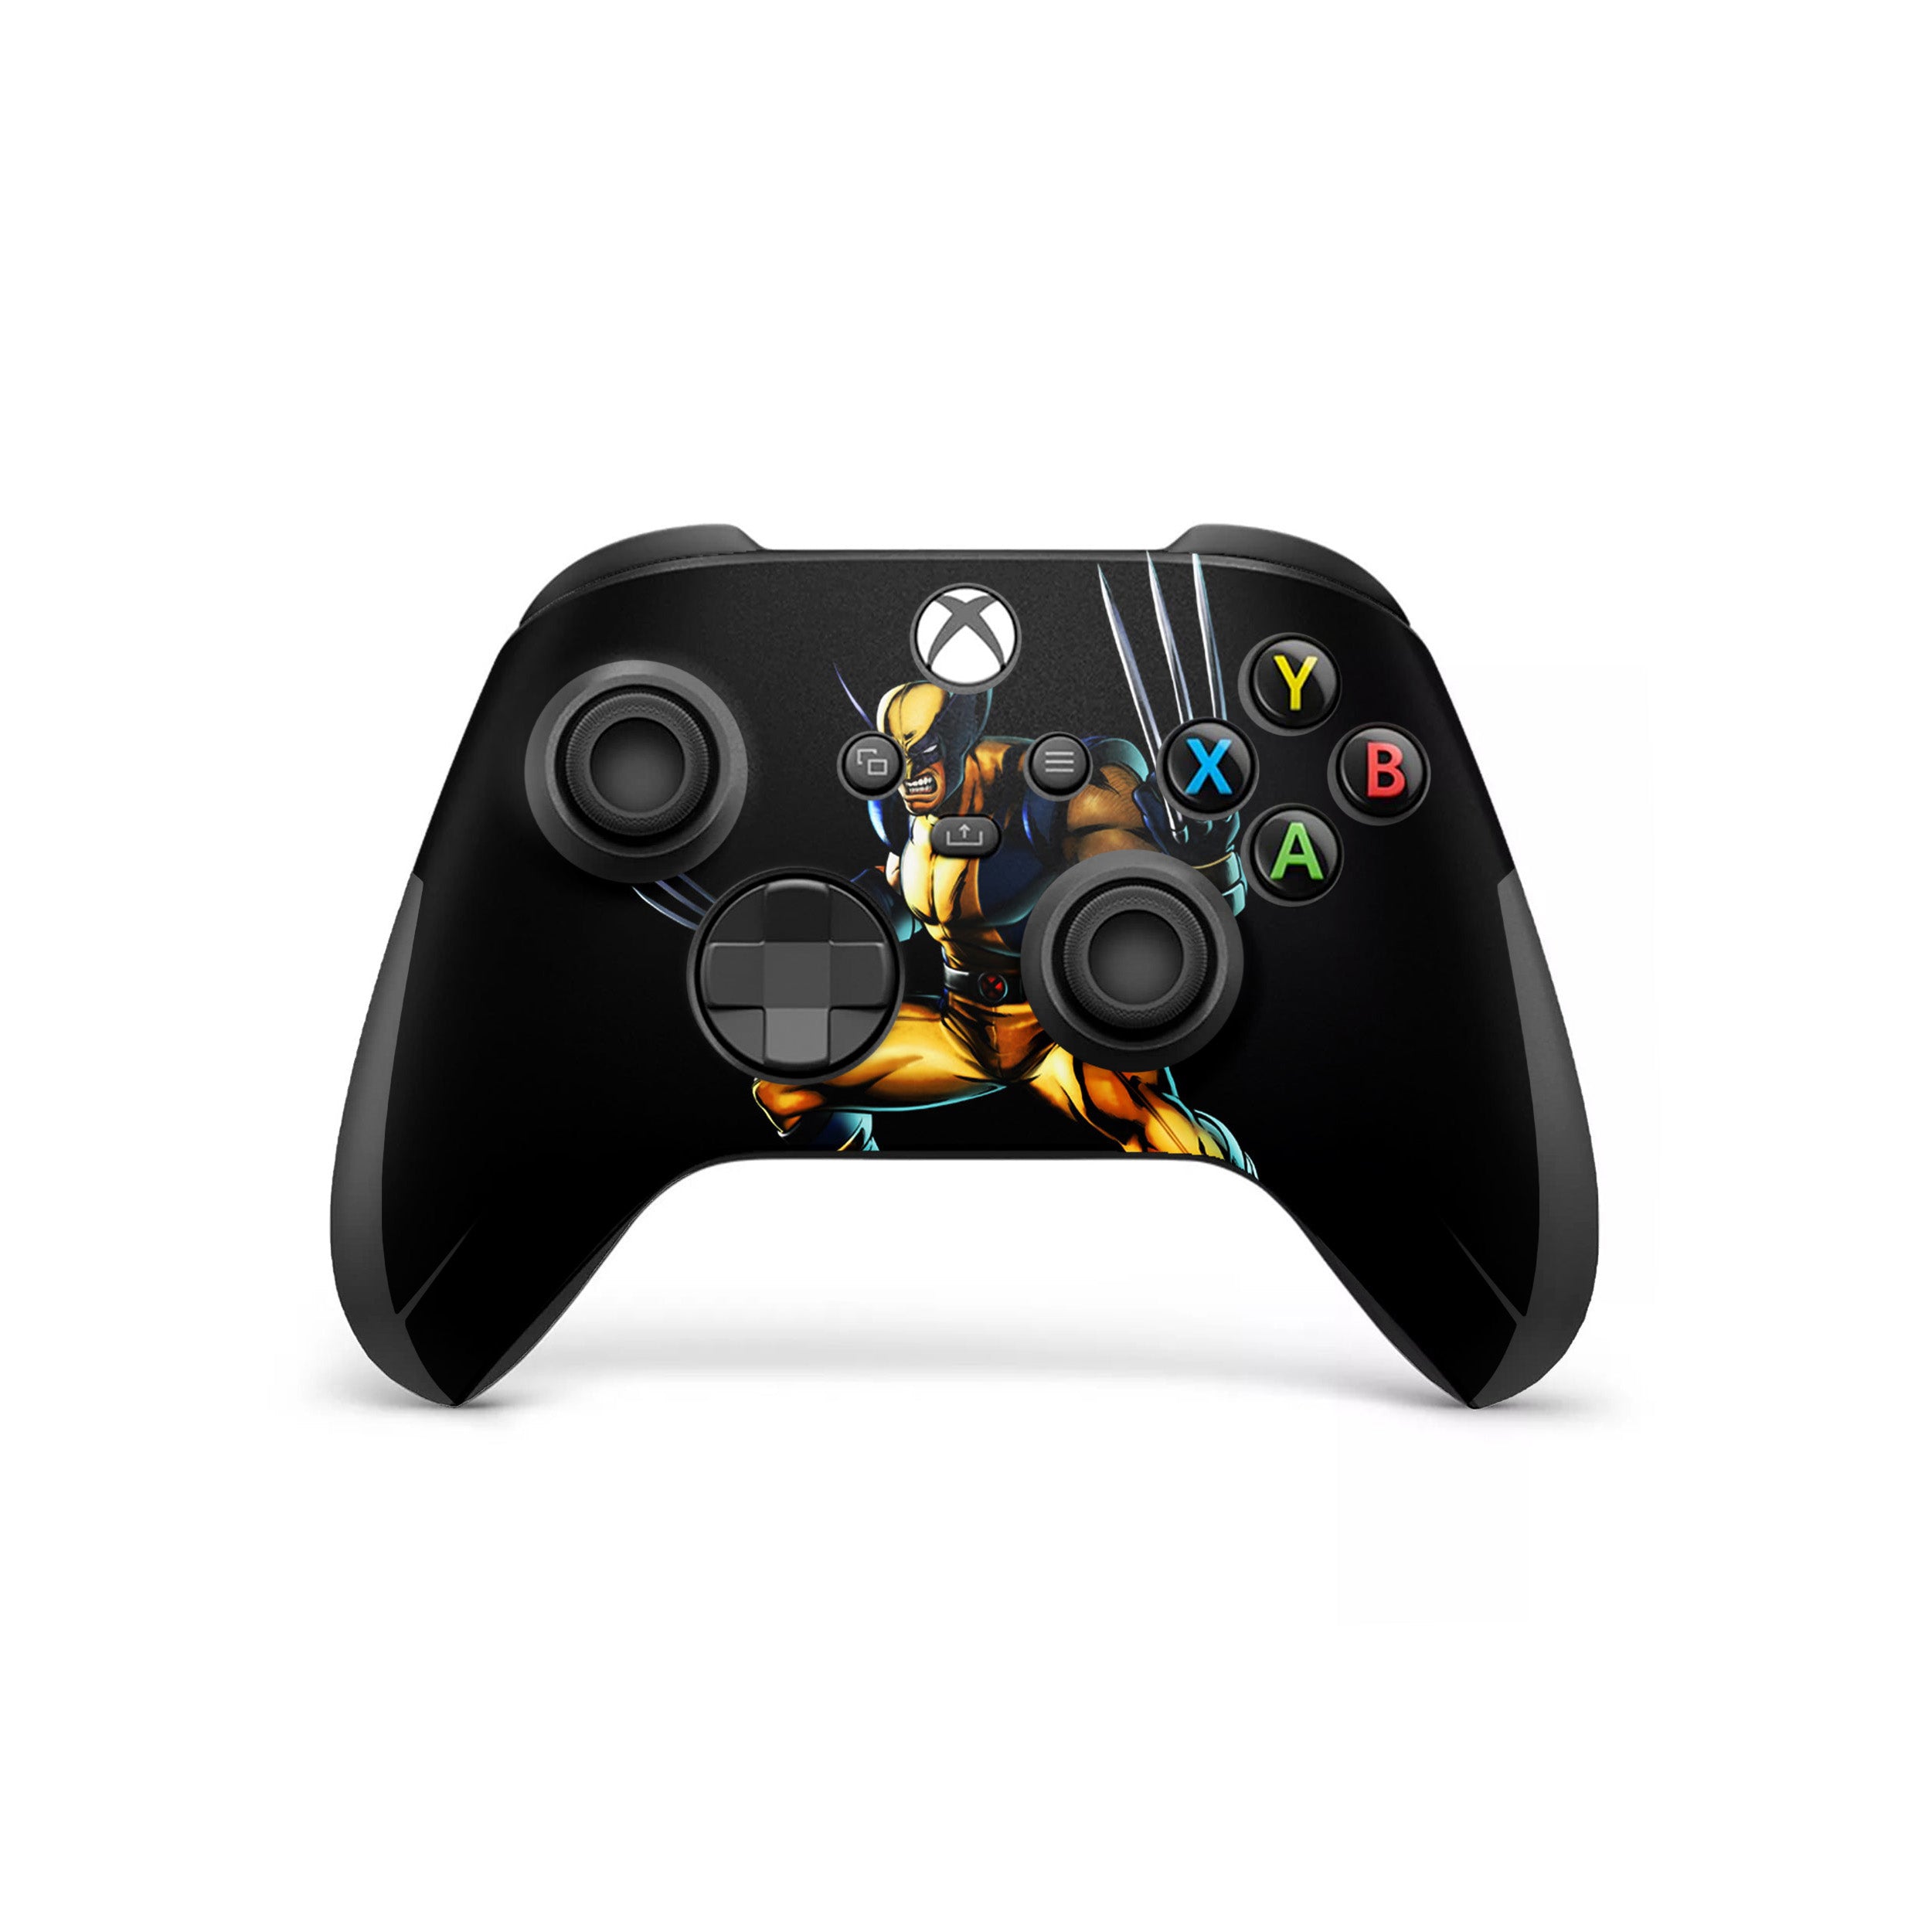 A video game skin featuring a Marvel Comics X Men Wolverine design for the Xbox Wireless Controller.